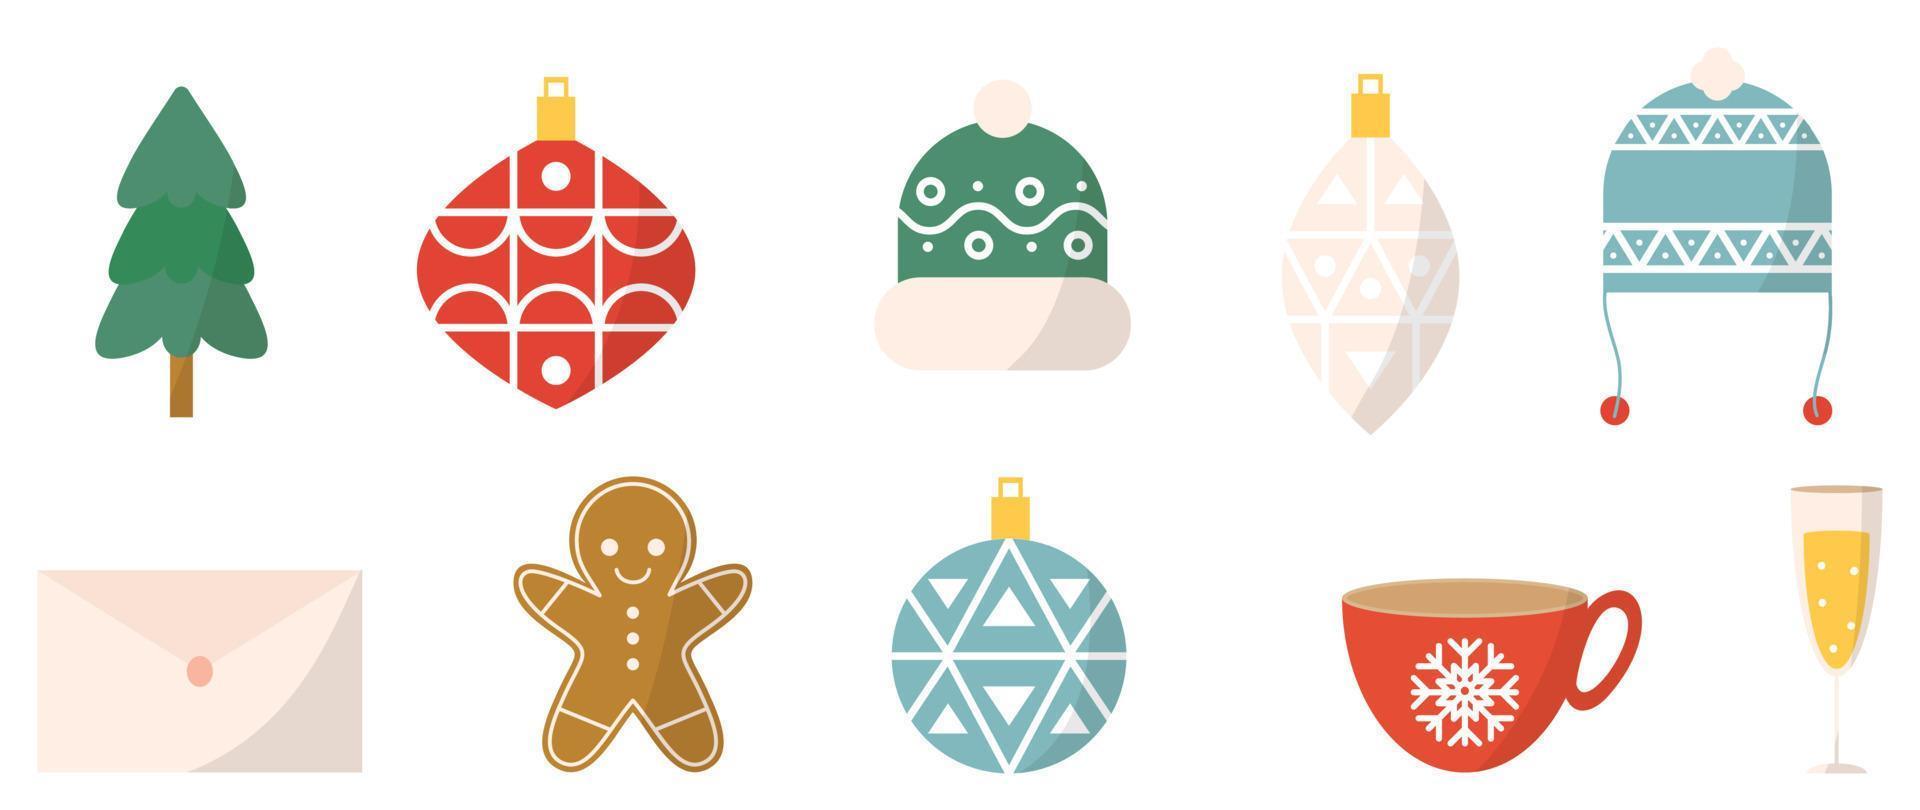 Set of winter vibrant christmas element vector illustration. Collection of christmas tree, bauble ball, knitted hat, letter, gingerbread man. Design for sticker, card, poster, invitation, greeting.